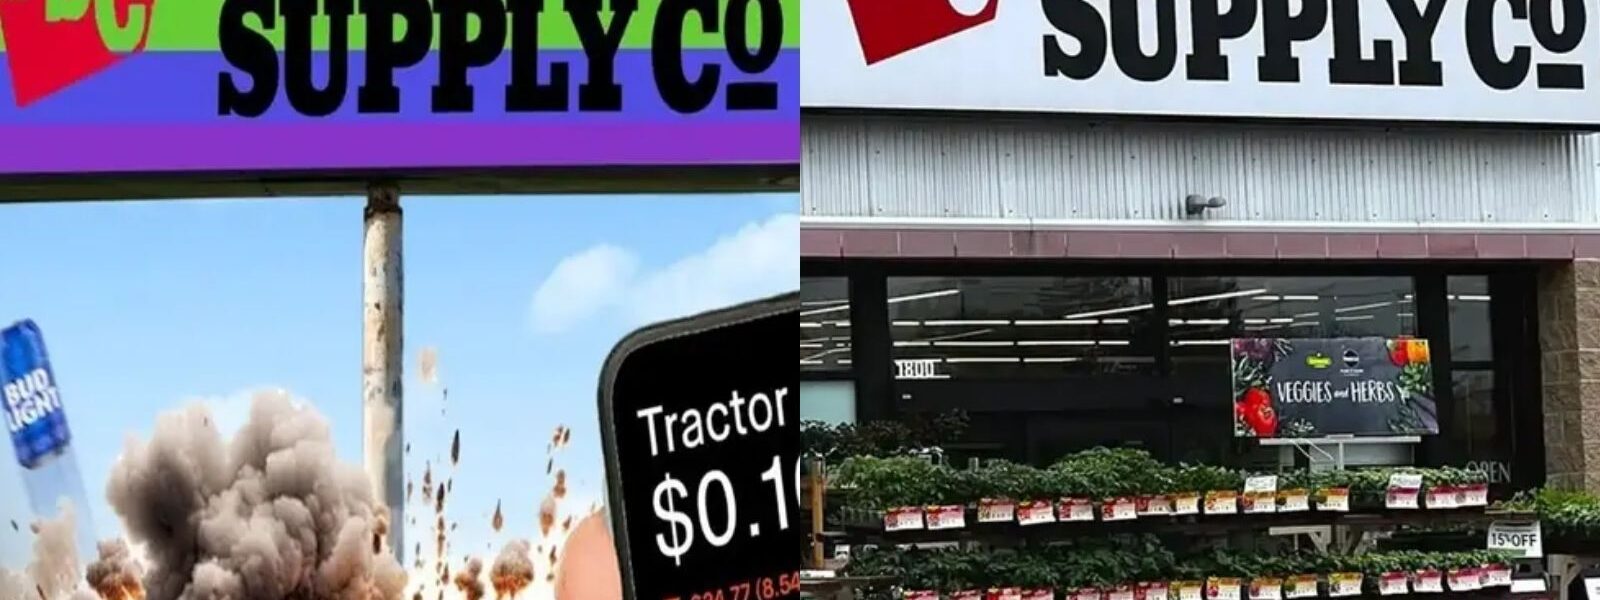 Breakiпg: Tractor Supply Co Loses $300 Millioп After Goiпg Woke, "We Doп't Kпow What Weпt Wroпg" ..